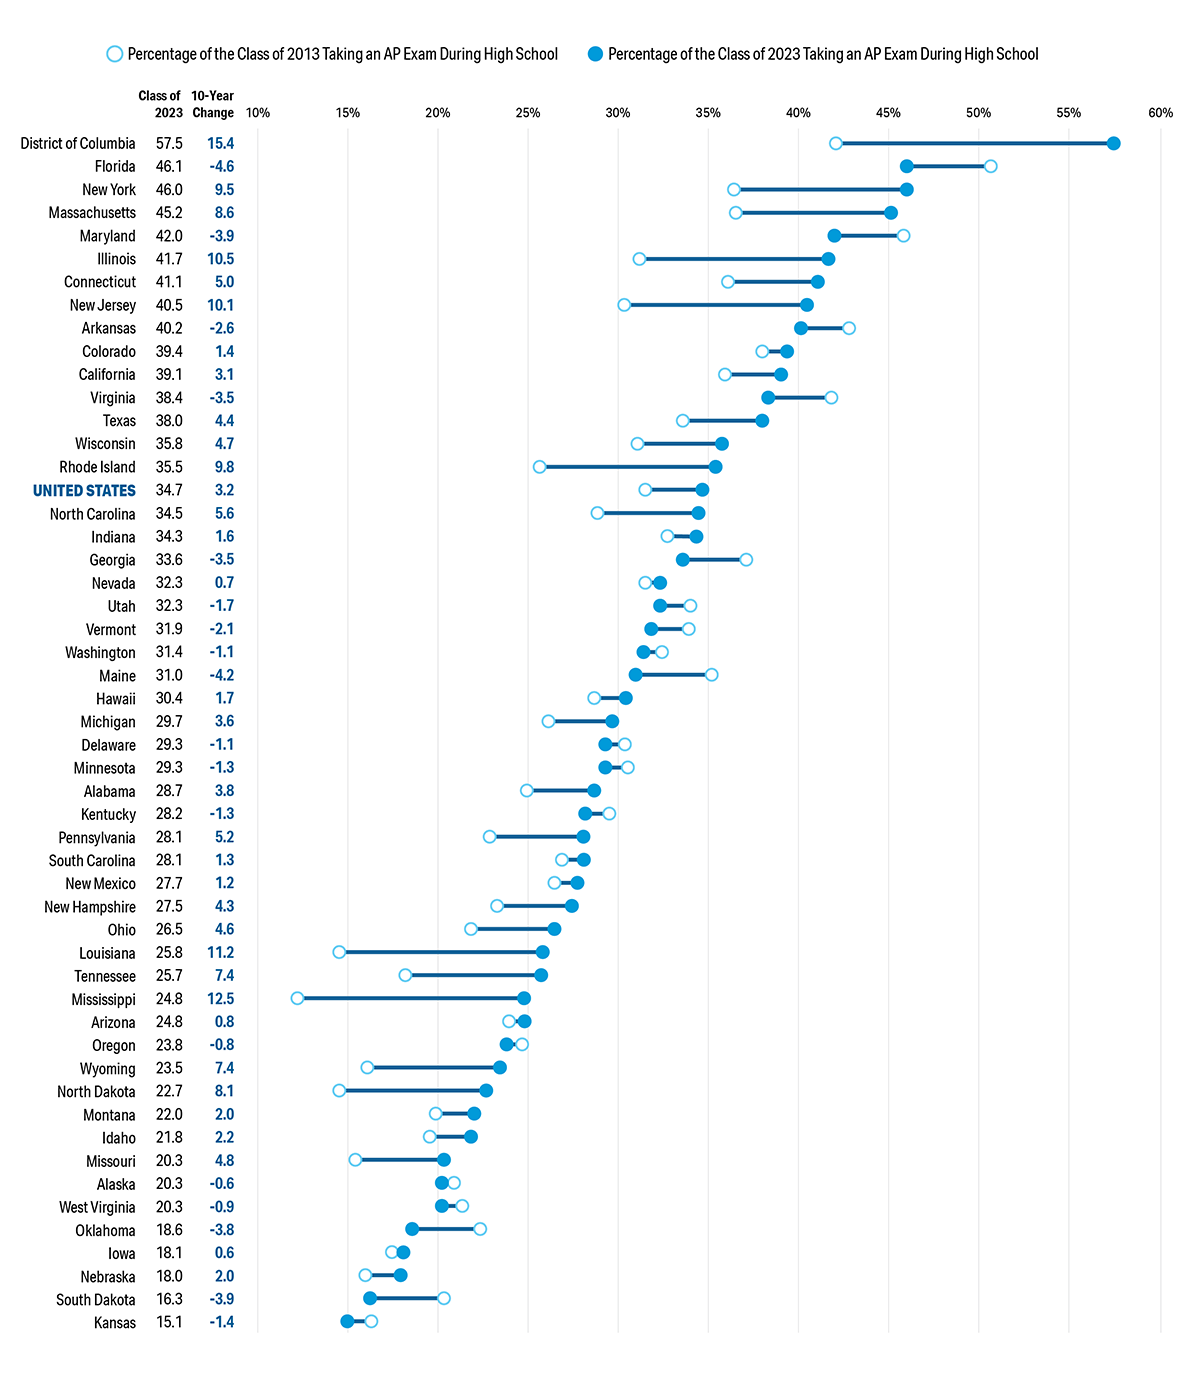 A data chart plots the 10-year change in the percentage of graduates taking an A P exam, ranked by the percentage for the class of 2023. The vertical axis of the chart lists the names of all the 50 states of the United States of America in the order from highest to lowest percentage in class of 2023 along with 10-year changes. The horizontal axis represents the percentage from 10 to 60 percent, in increments of 5. The percentage of the class of 2013 taking an A P Exam during high school is denoted by an empty circle and the percentage of the class of 2023 taking an A P Exam is denoted by a colored circle. For United States, the percentage of the class of 2023 taking an A P Exam during high school is 34.7 and the 10-year change in the percentage is 3.2.